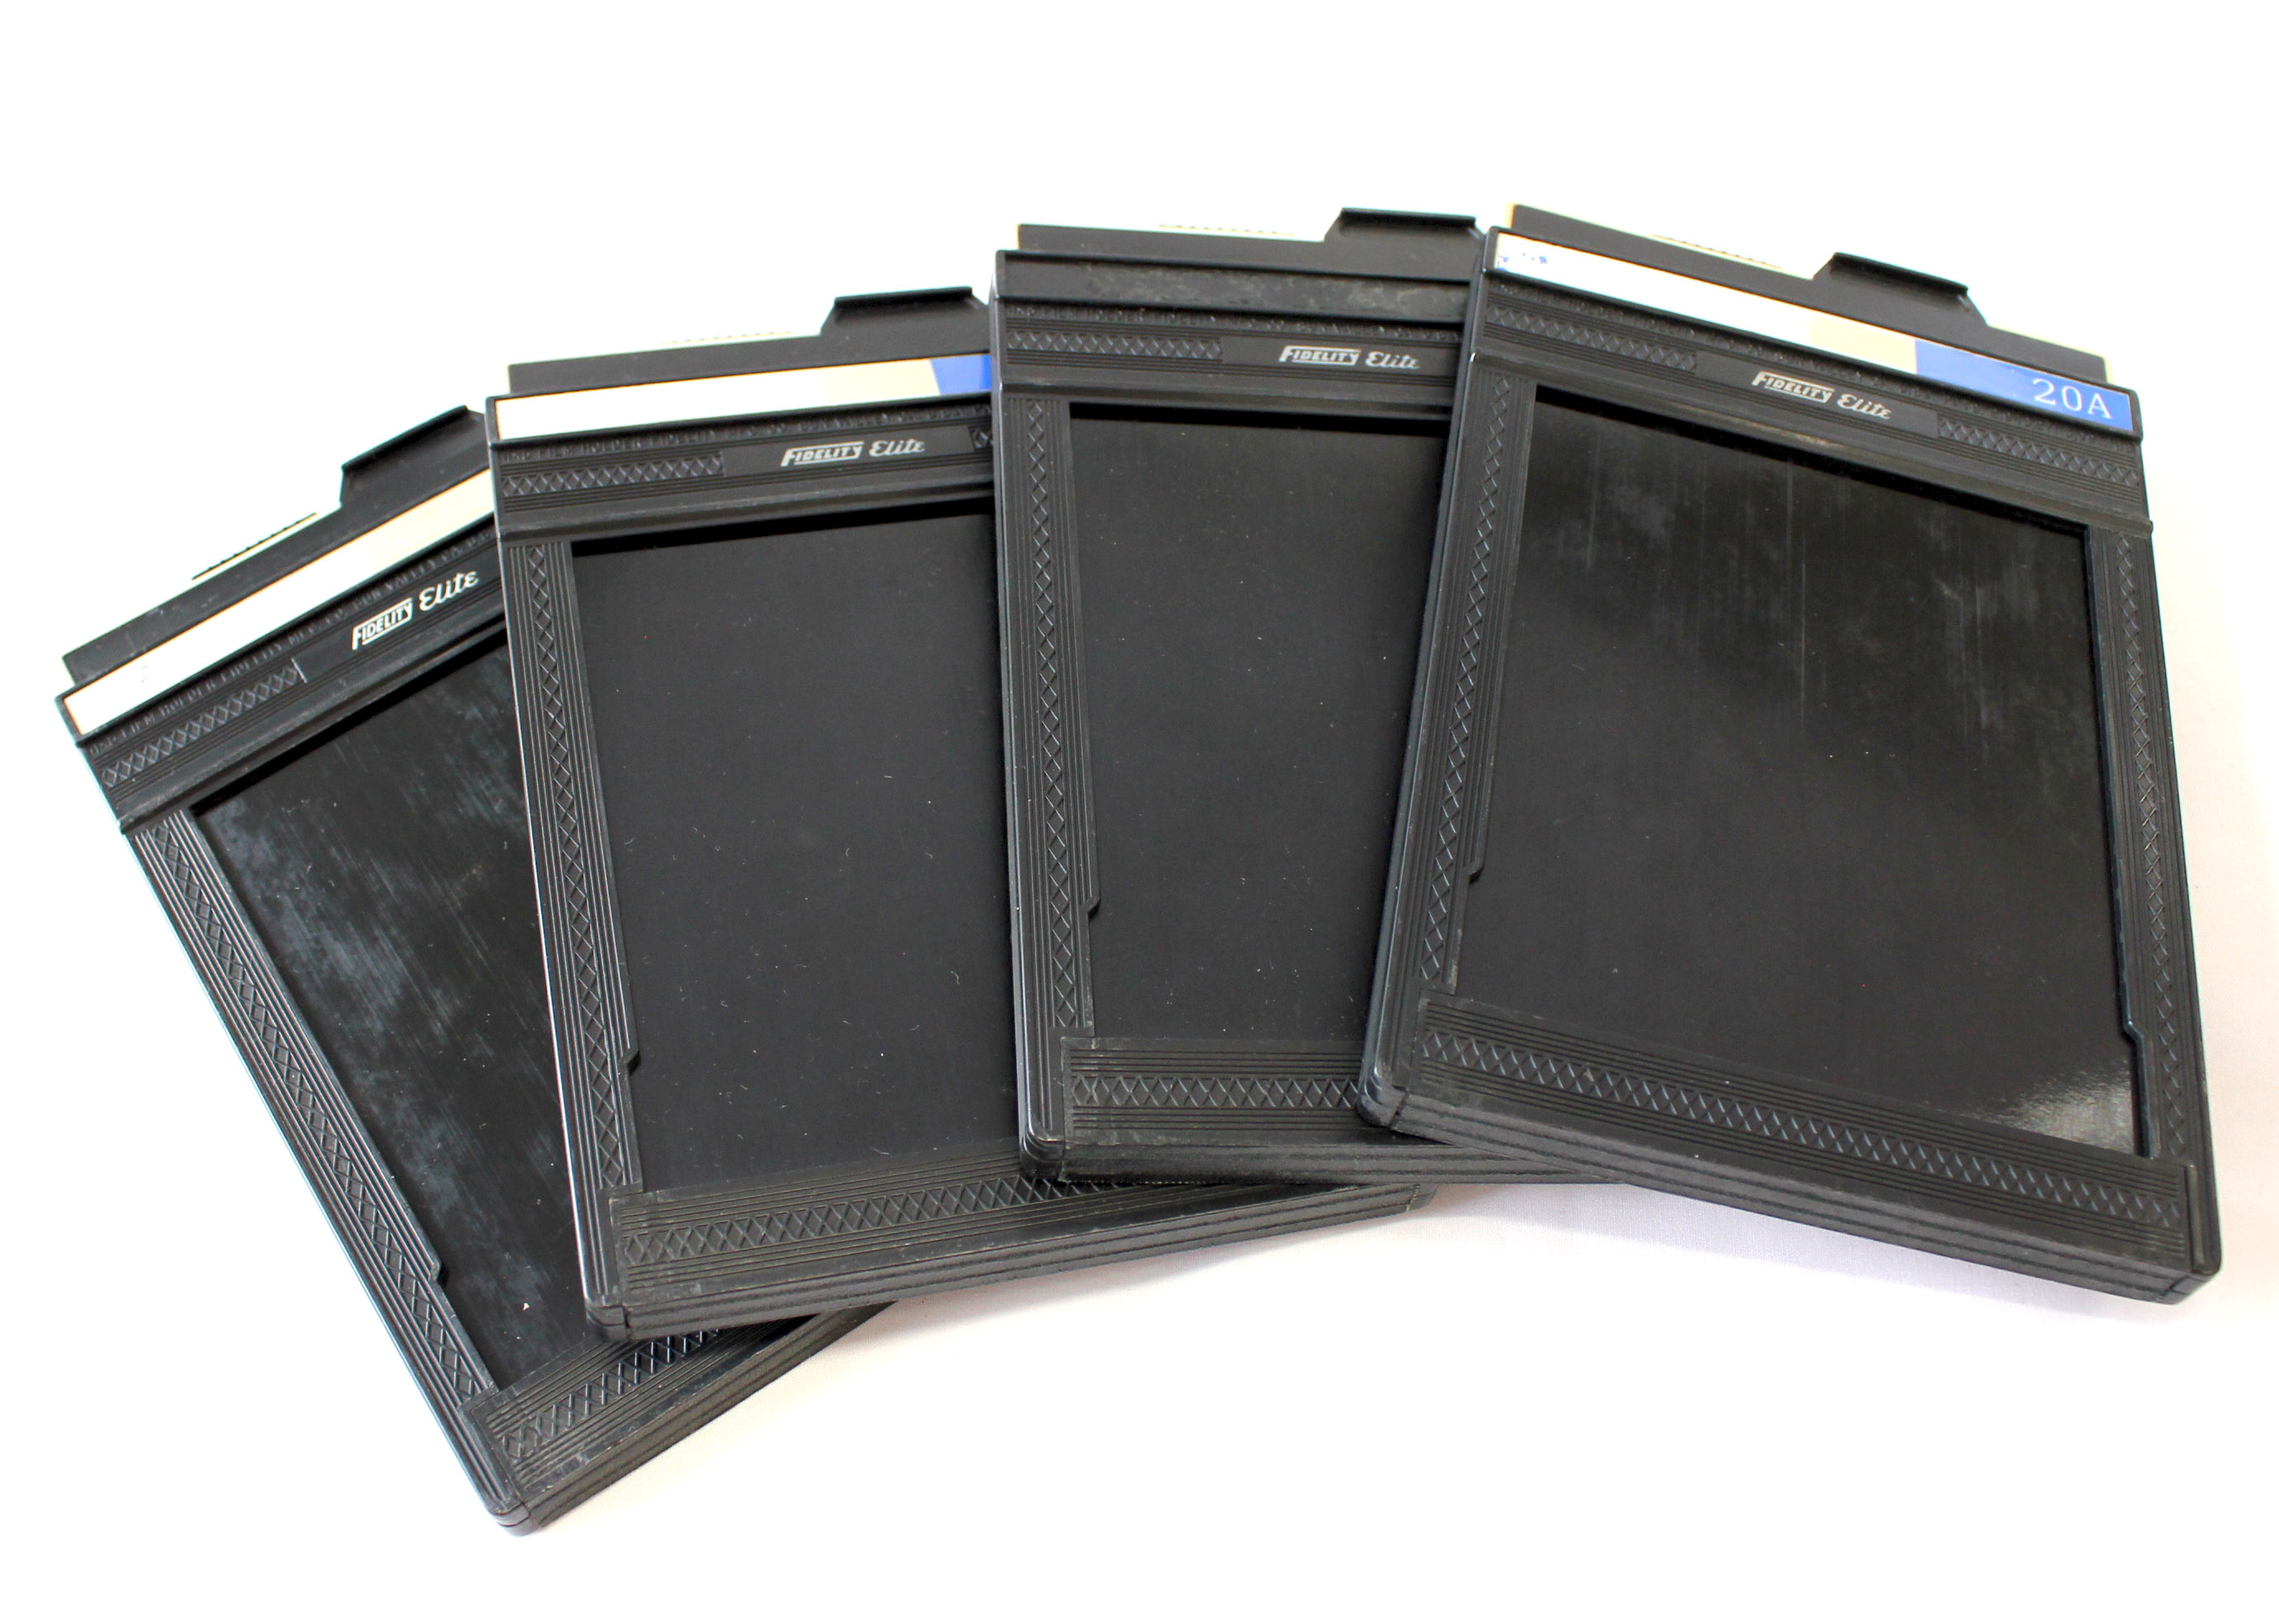 Fidelity 4x5 Cut Film Holder Lot of 4 from Japan